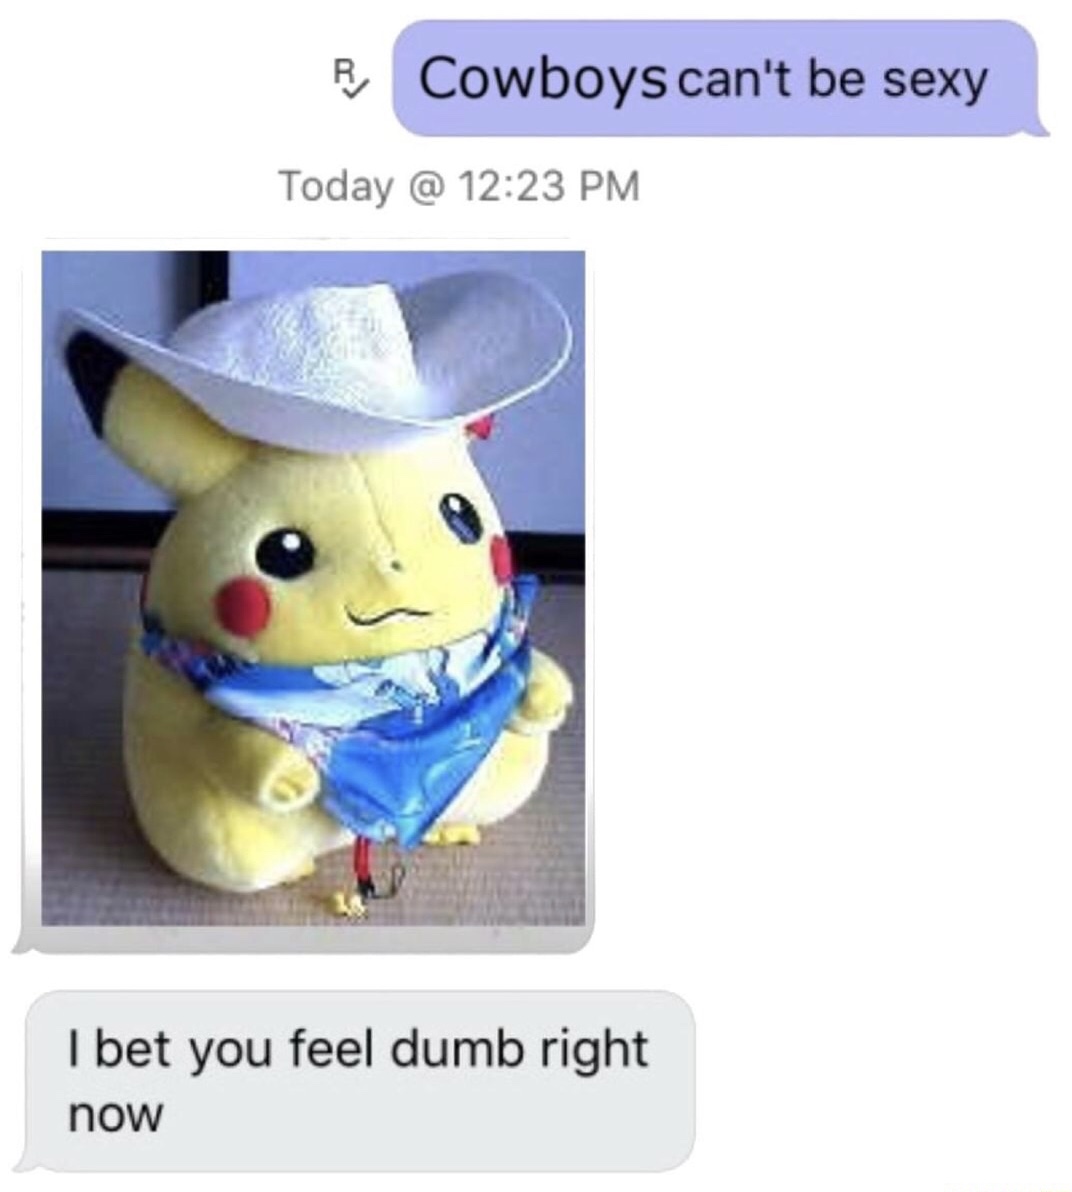 wanna be a cowboy baby - R Cowboys can't be sexy Today @ I bet you feel dumb right now